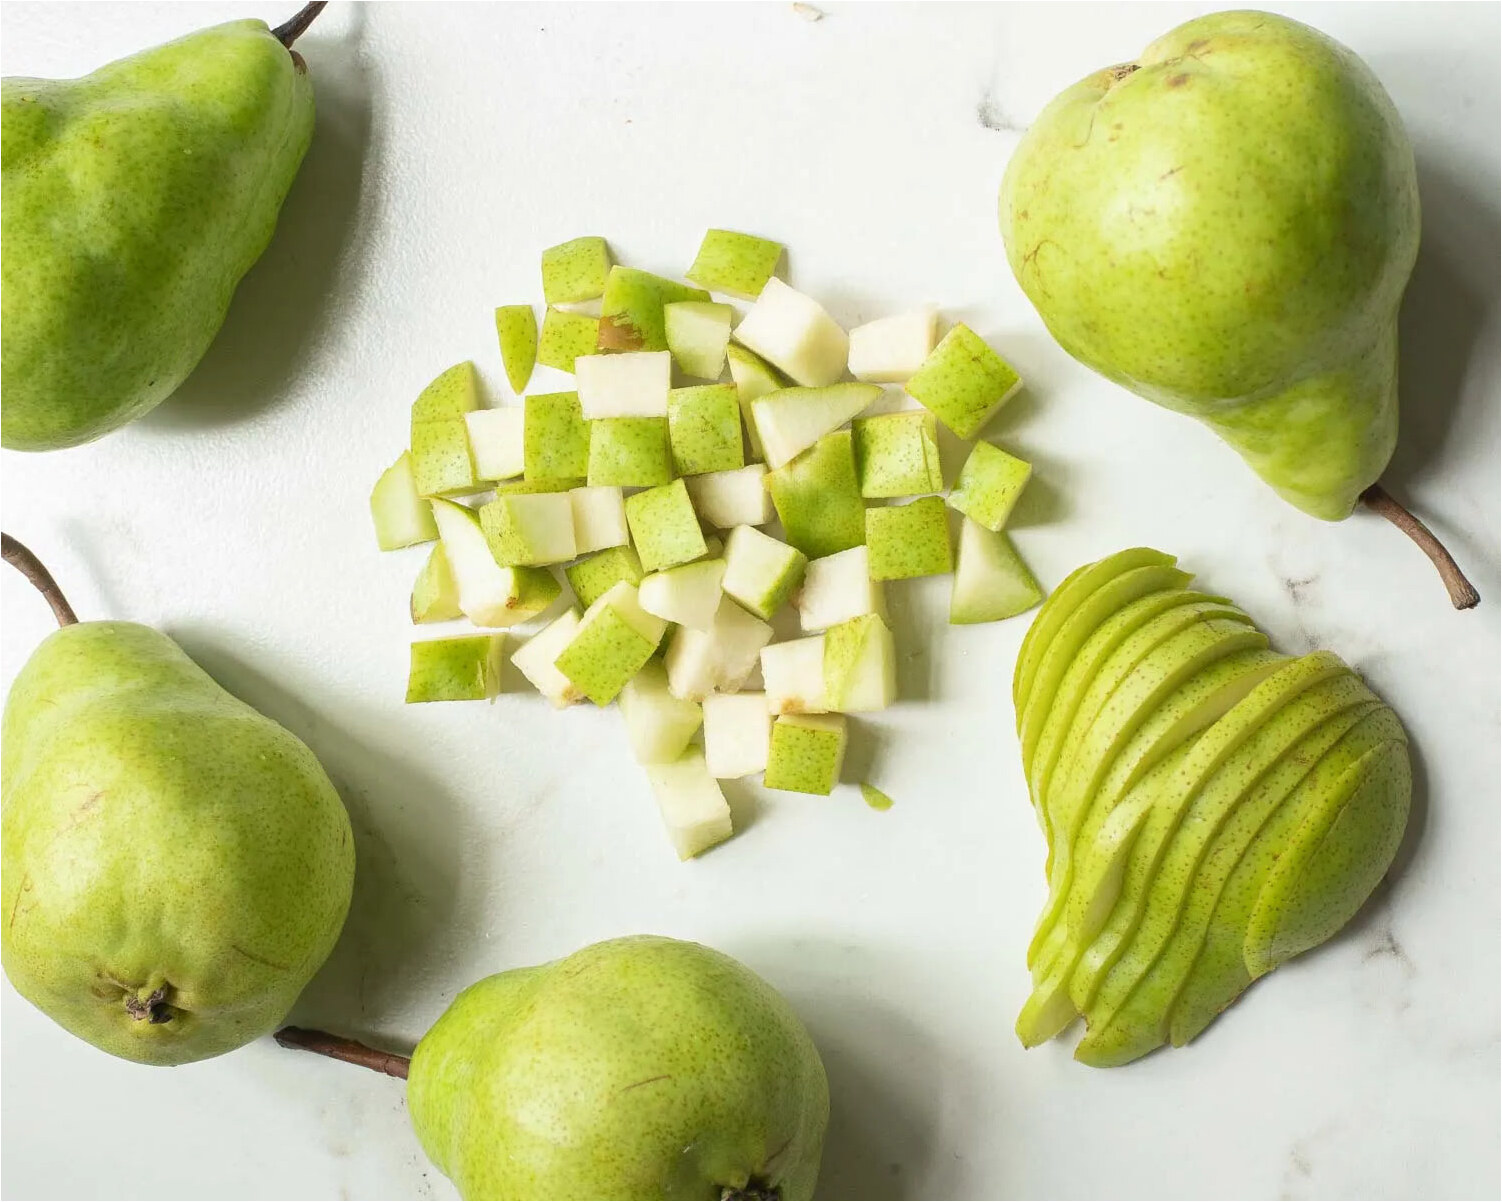 How To Store Cut Pears